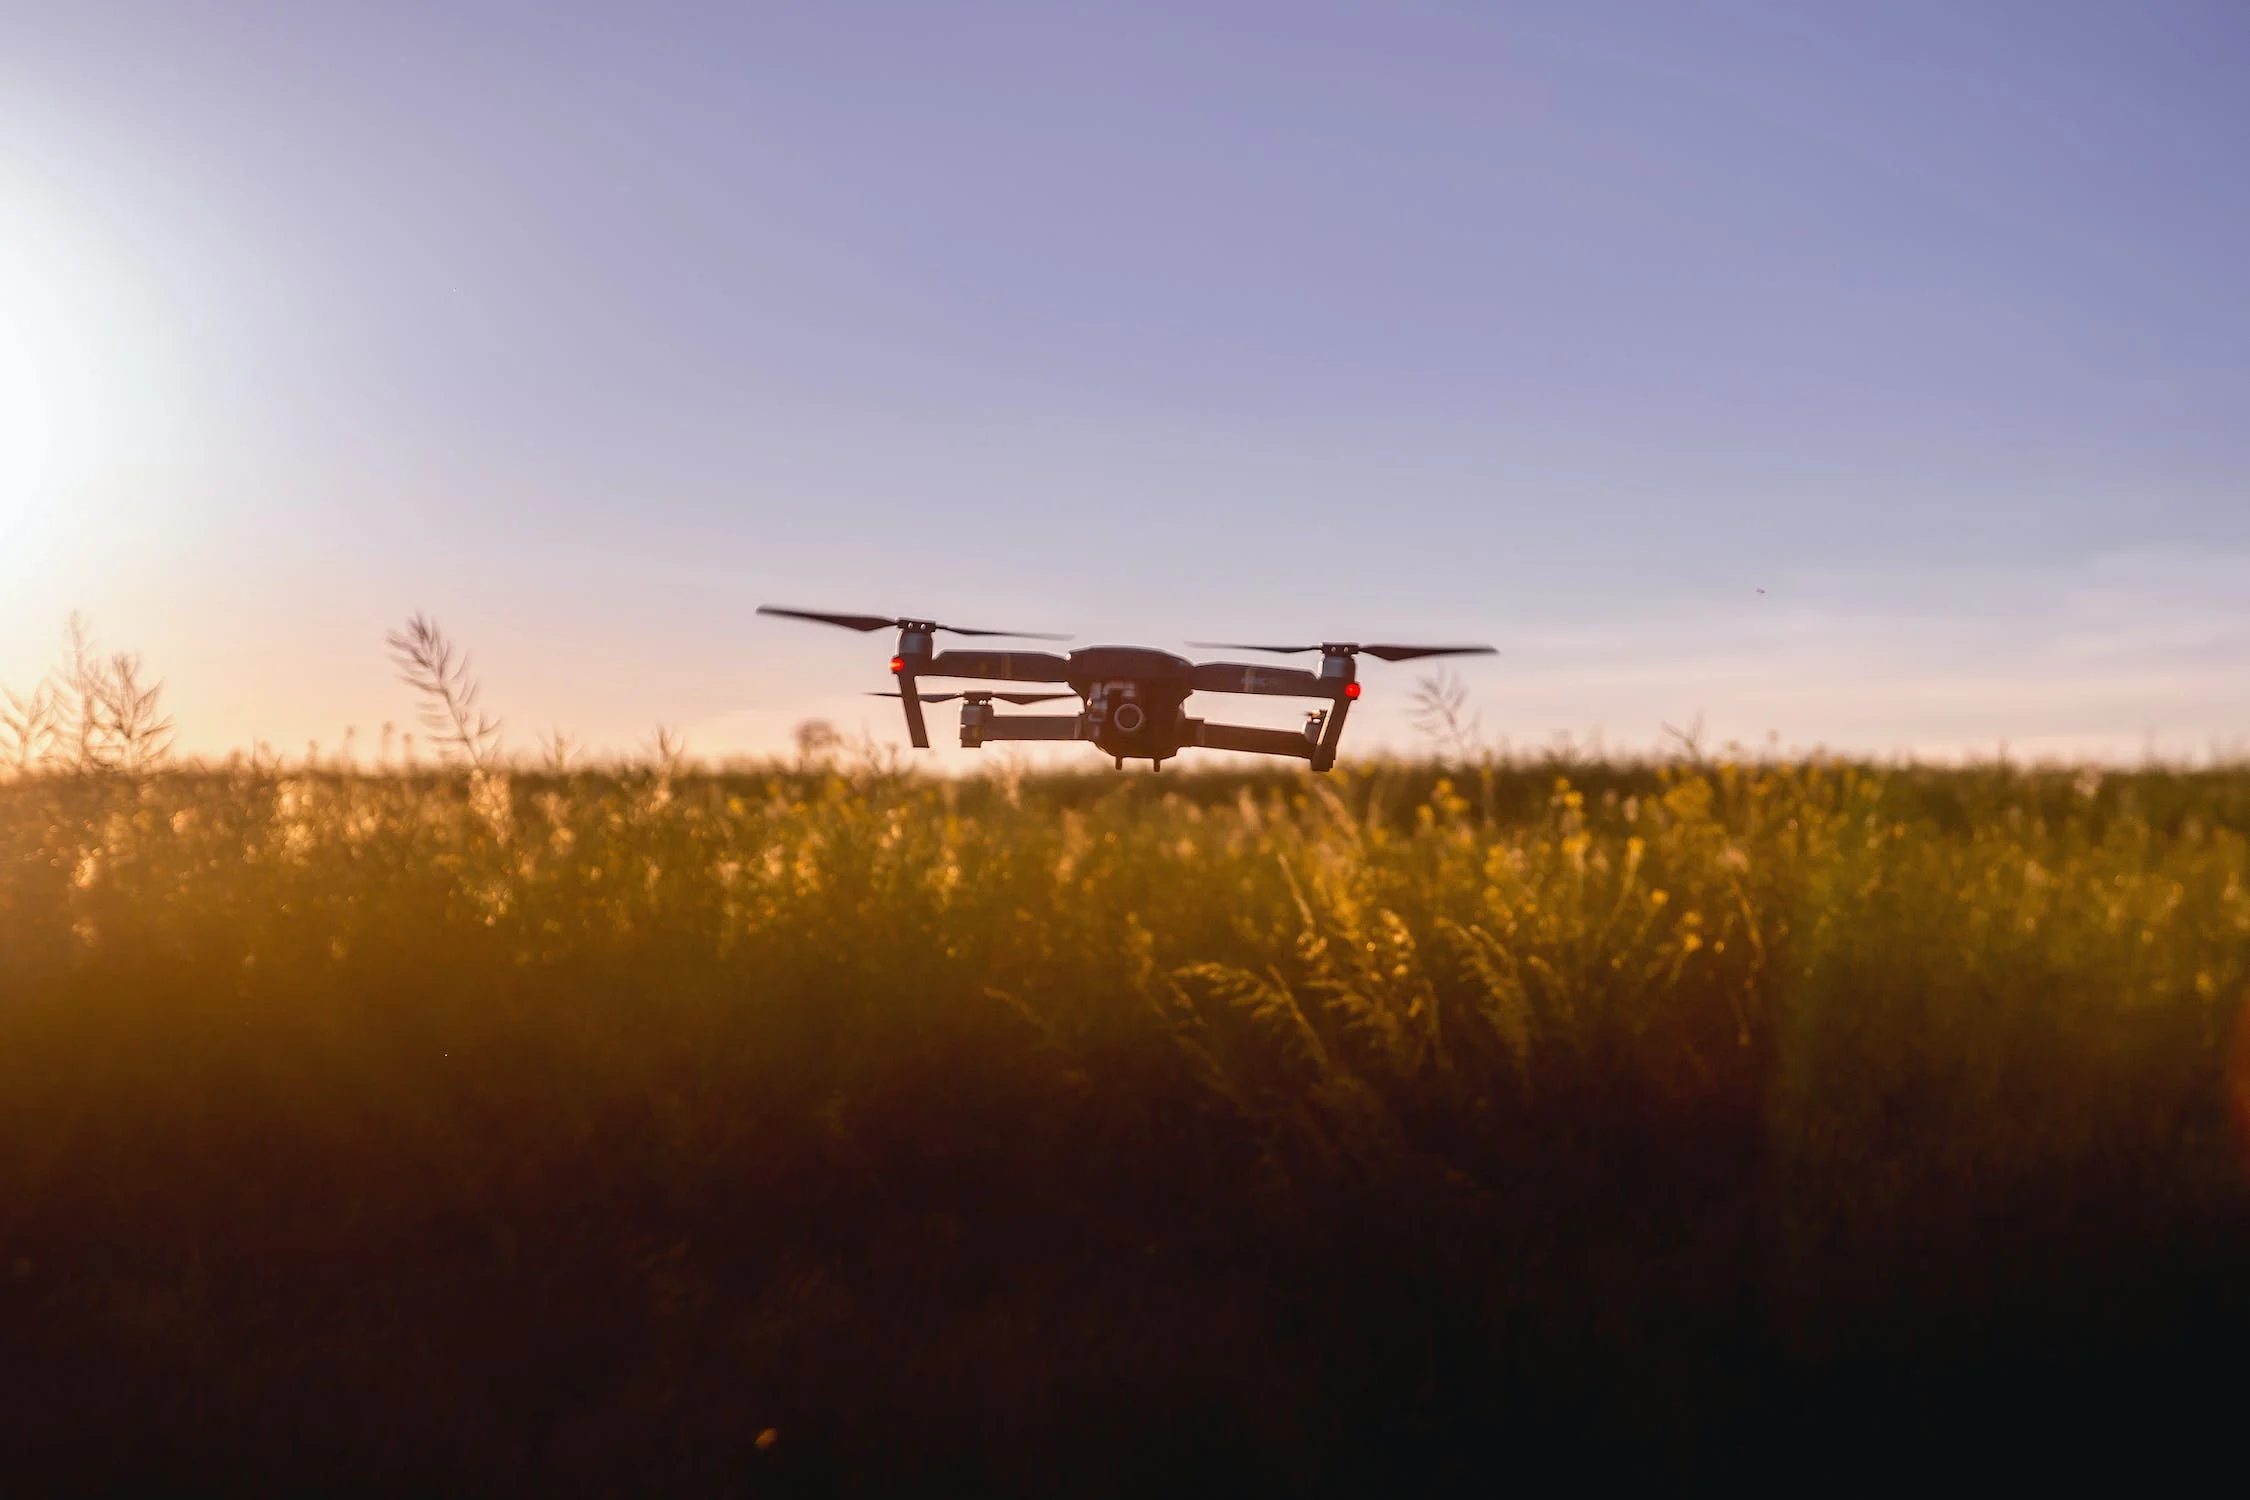 A drone flying above a farm field